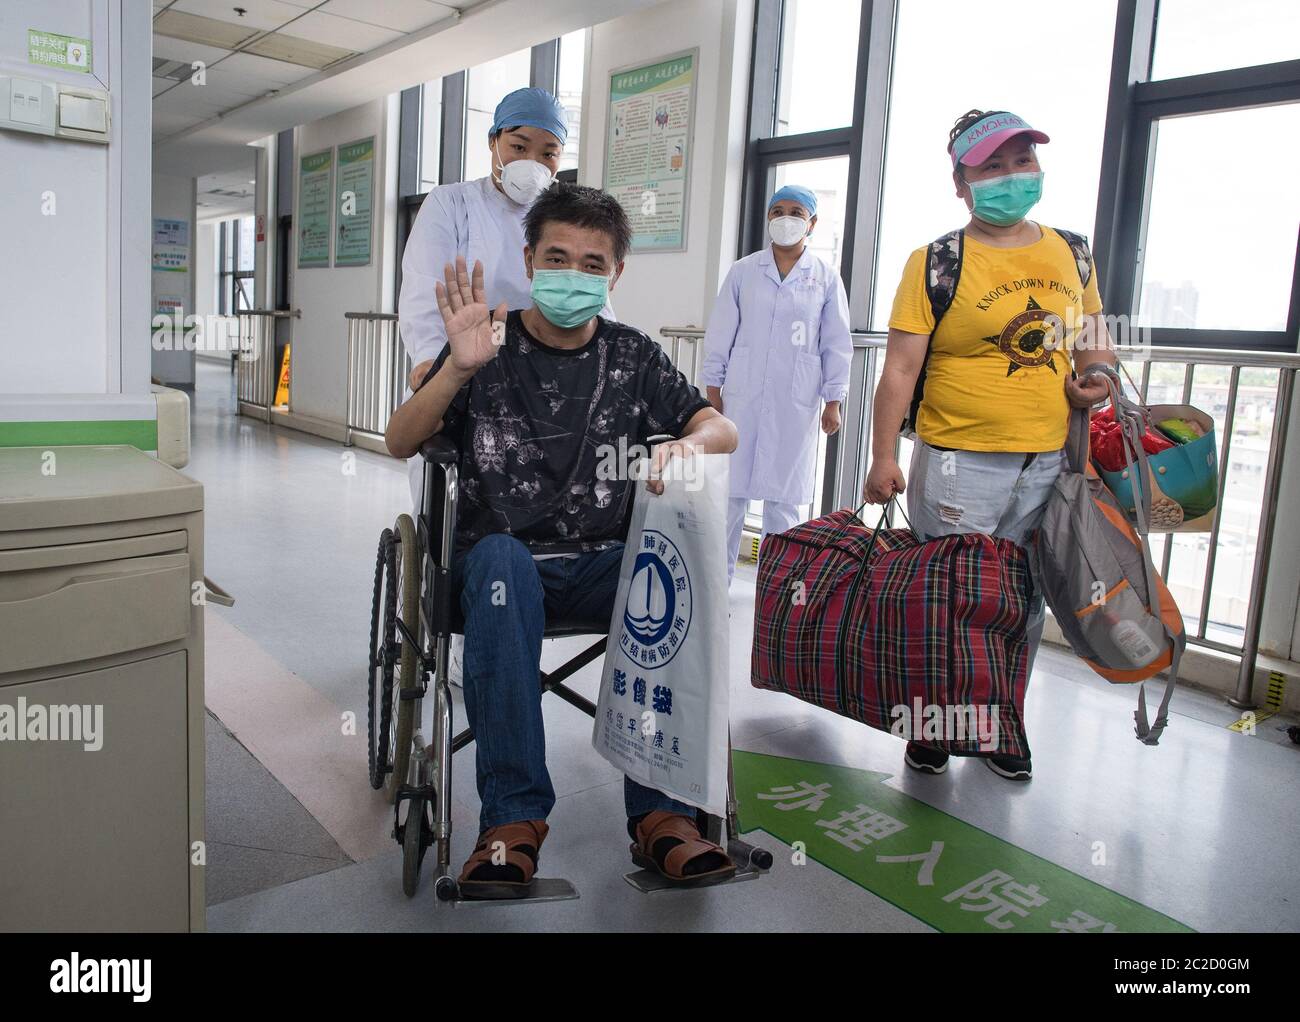 (200617) -- WUHAN, June 17, 2020 (Xinhua) -- Hu Dingjiang waves goodbye at Wuhan Pulmonary Hospital in Wuhan, central China's Hubei Province, June 17, 2020. Hu Dingjiang, 40, a recovered COVID-19 patient, was discharged from Wuhan Pulmonary Hospital on Wednesday after receiving medical treatment and rehabilitation training for more than 100 days. He was diagnosed with the disease in early February, and was hospitalized in the ICU ward as one of the 81 severe COVID-19 cases in the hospital. The functions of his lungs recovered on April 5 with 40 days of extracorporeal membrane oxygenation (ECMO Stock Photo